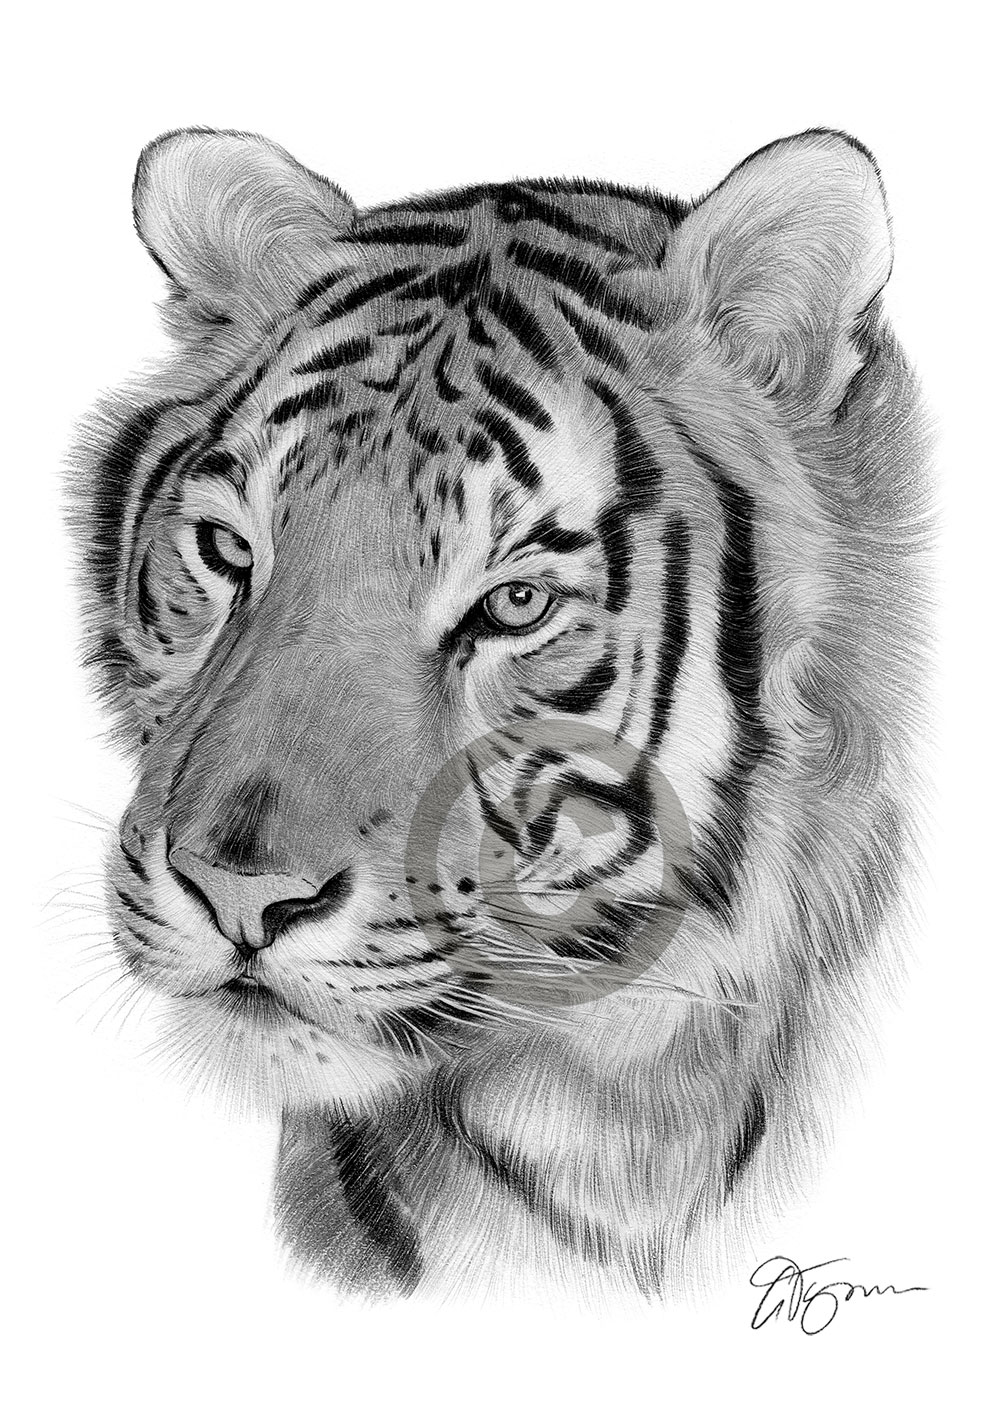 Pencil drawing portrait of a Bengal tiger by artist Gary Tymon